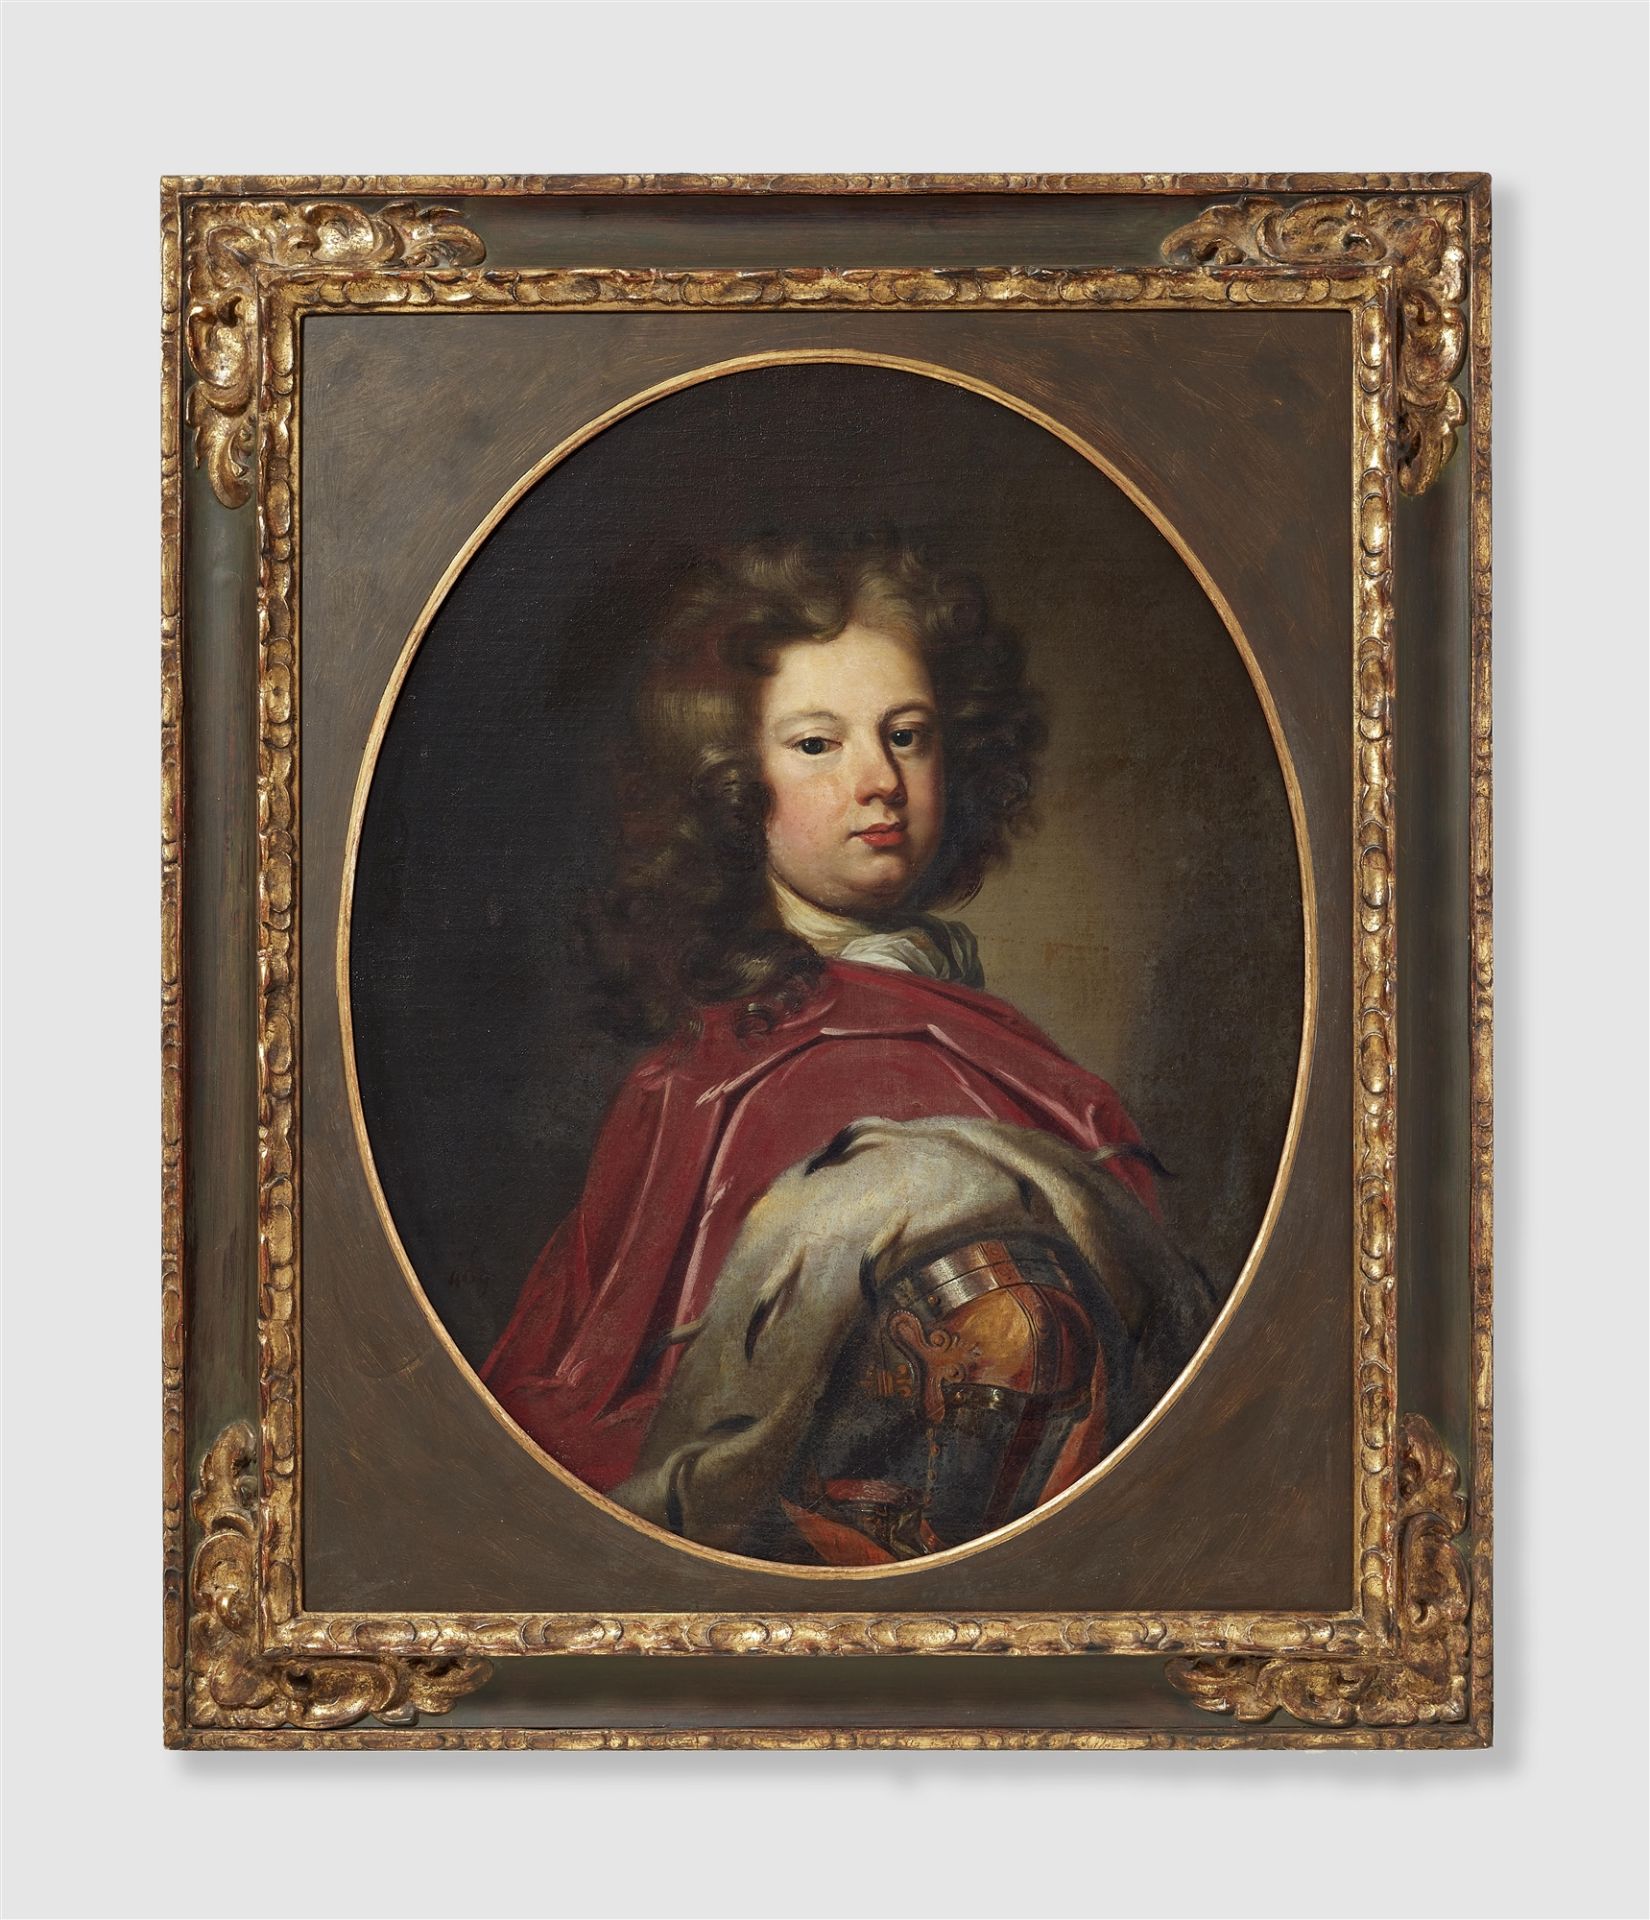 Anthoni Schoojans, attributed to, Crown Prince Friedrich Wilhelm of Prussia (1688 - 1740)